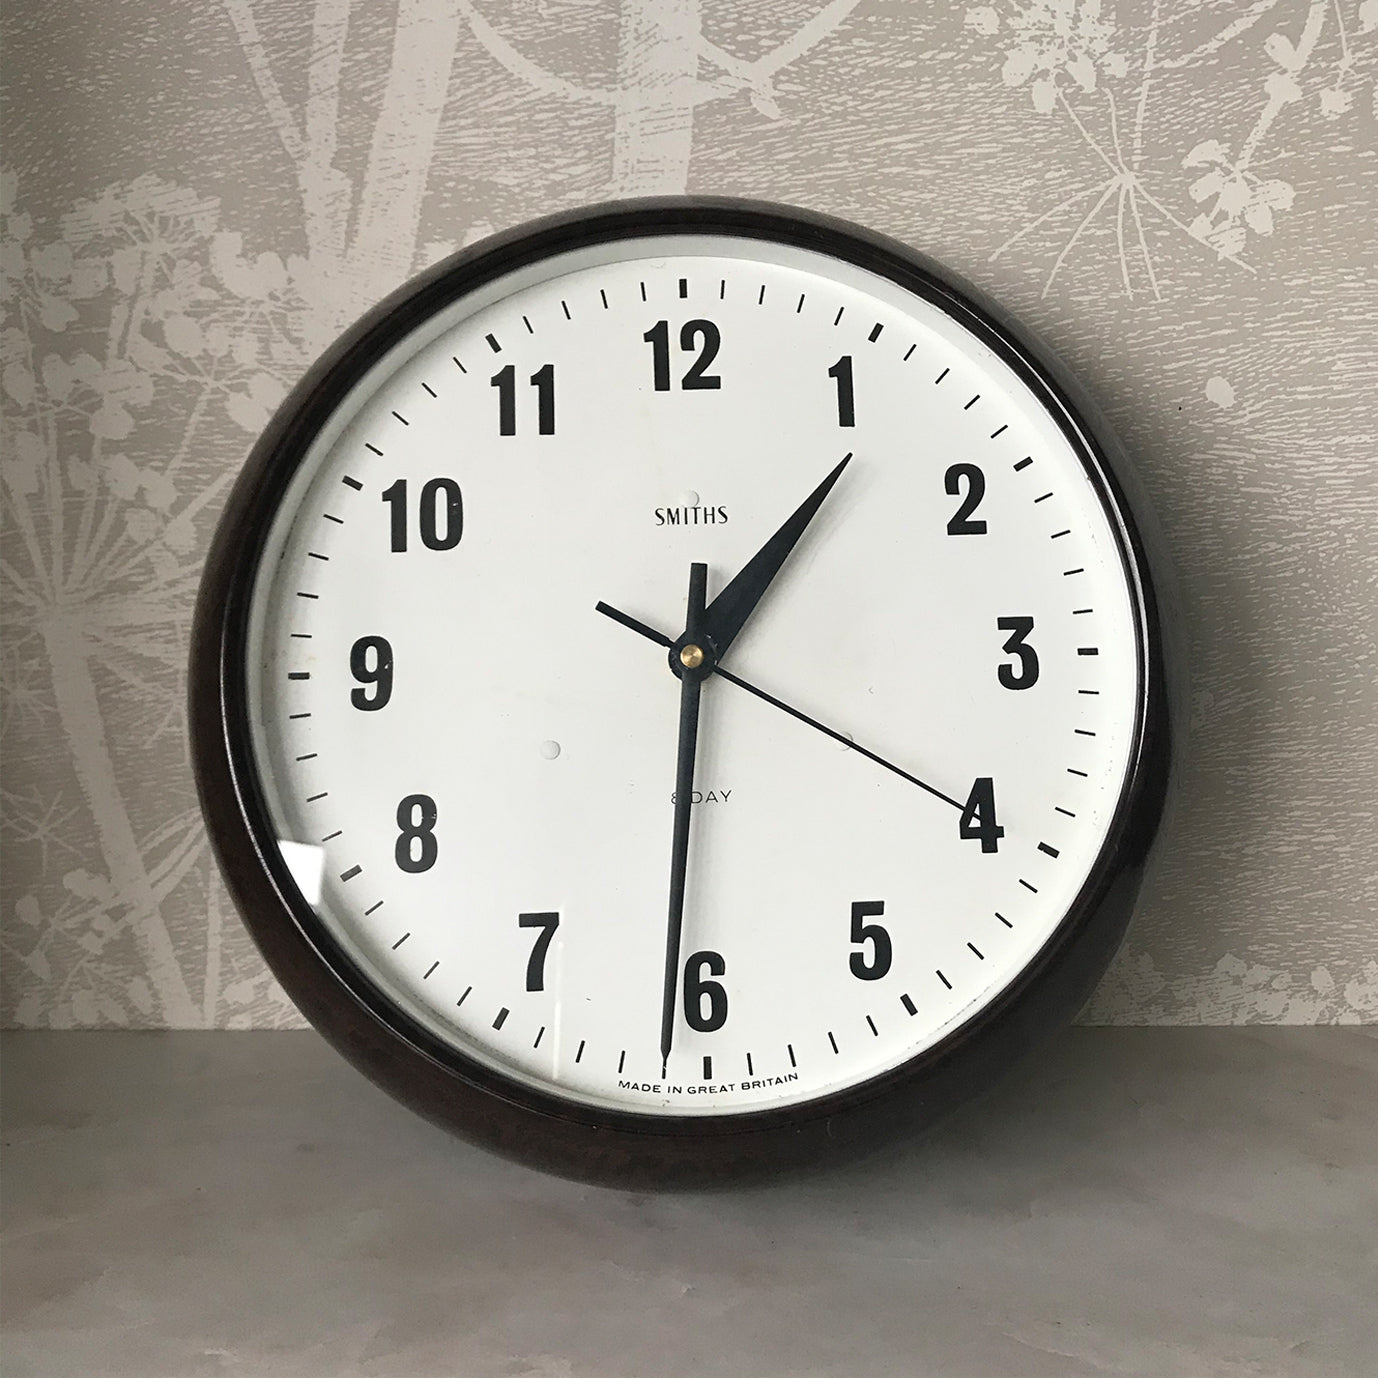 Vintage industrial/office electric Smith's wall clock from the 1940s, made by the English clock company Smiths. Made from brown/Tortoiseshell Bakelite which is in nice clean condition having been polished and waxed, with a white dial and retaining its original hands - SHOP NOW - www.intovintage.co.uk